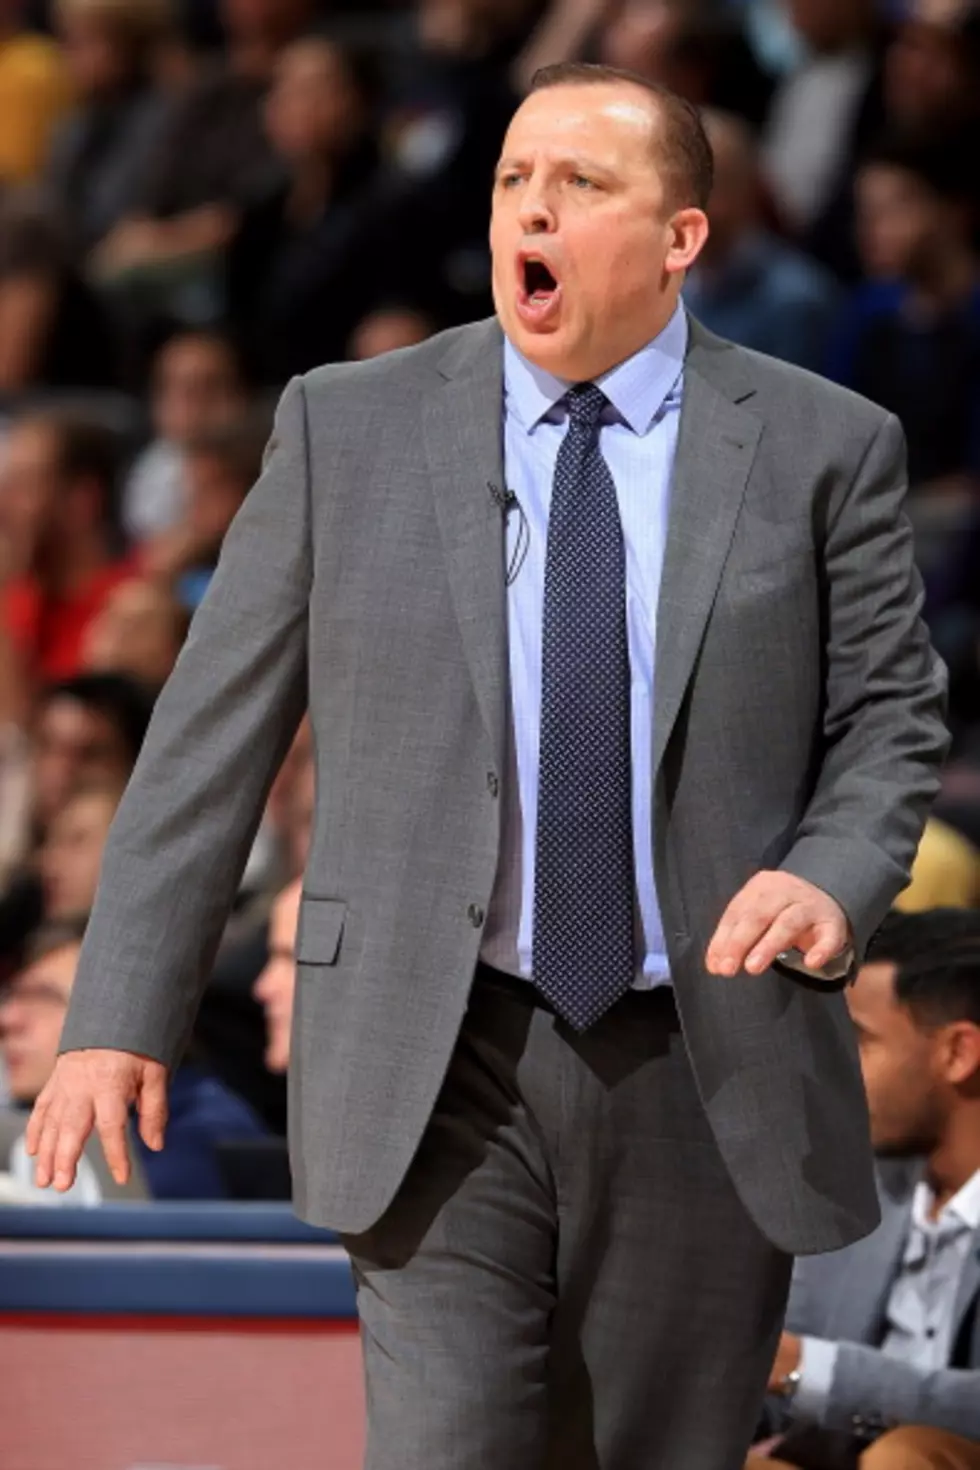 Reports: Pelicans Interested In Coach Tom Thibodeau